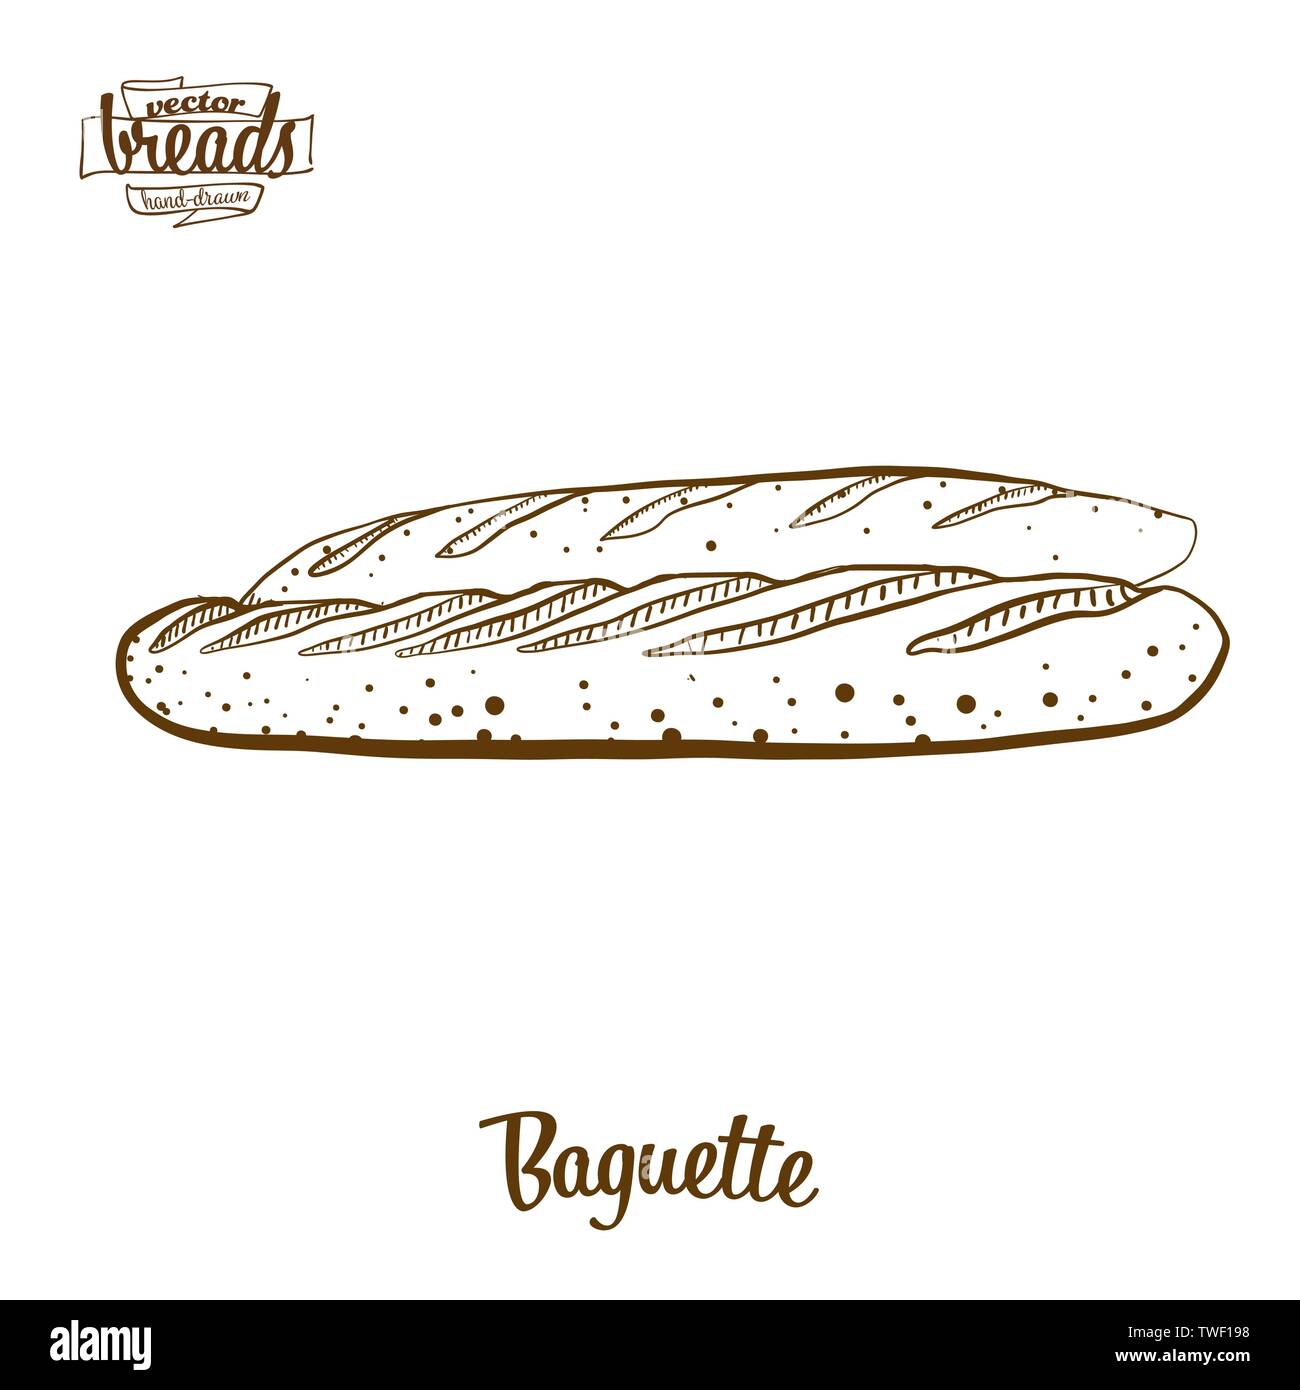 Baguette bread vector drawing. Food sketch of Yeast bread, usually known in France. Bakery illustration series. Stock Vector